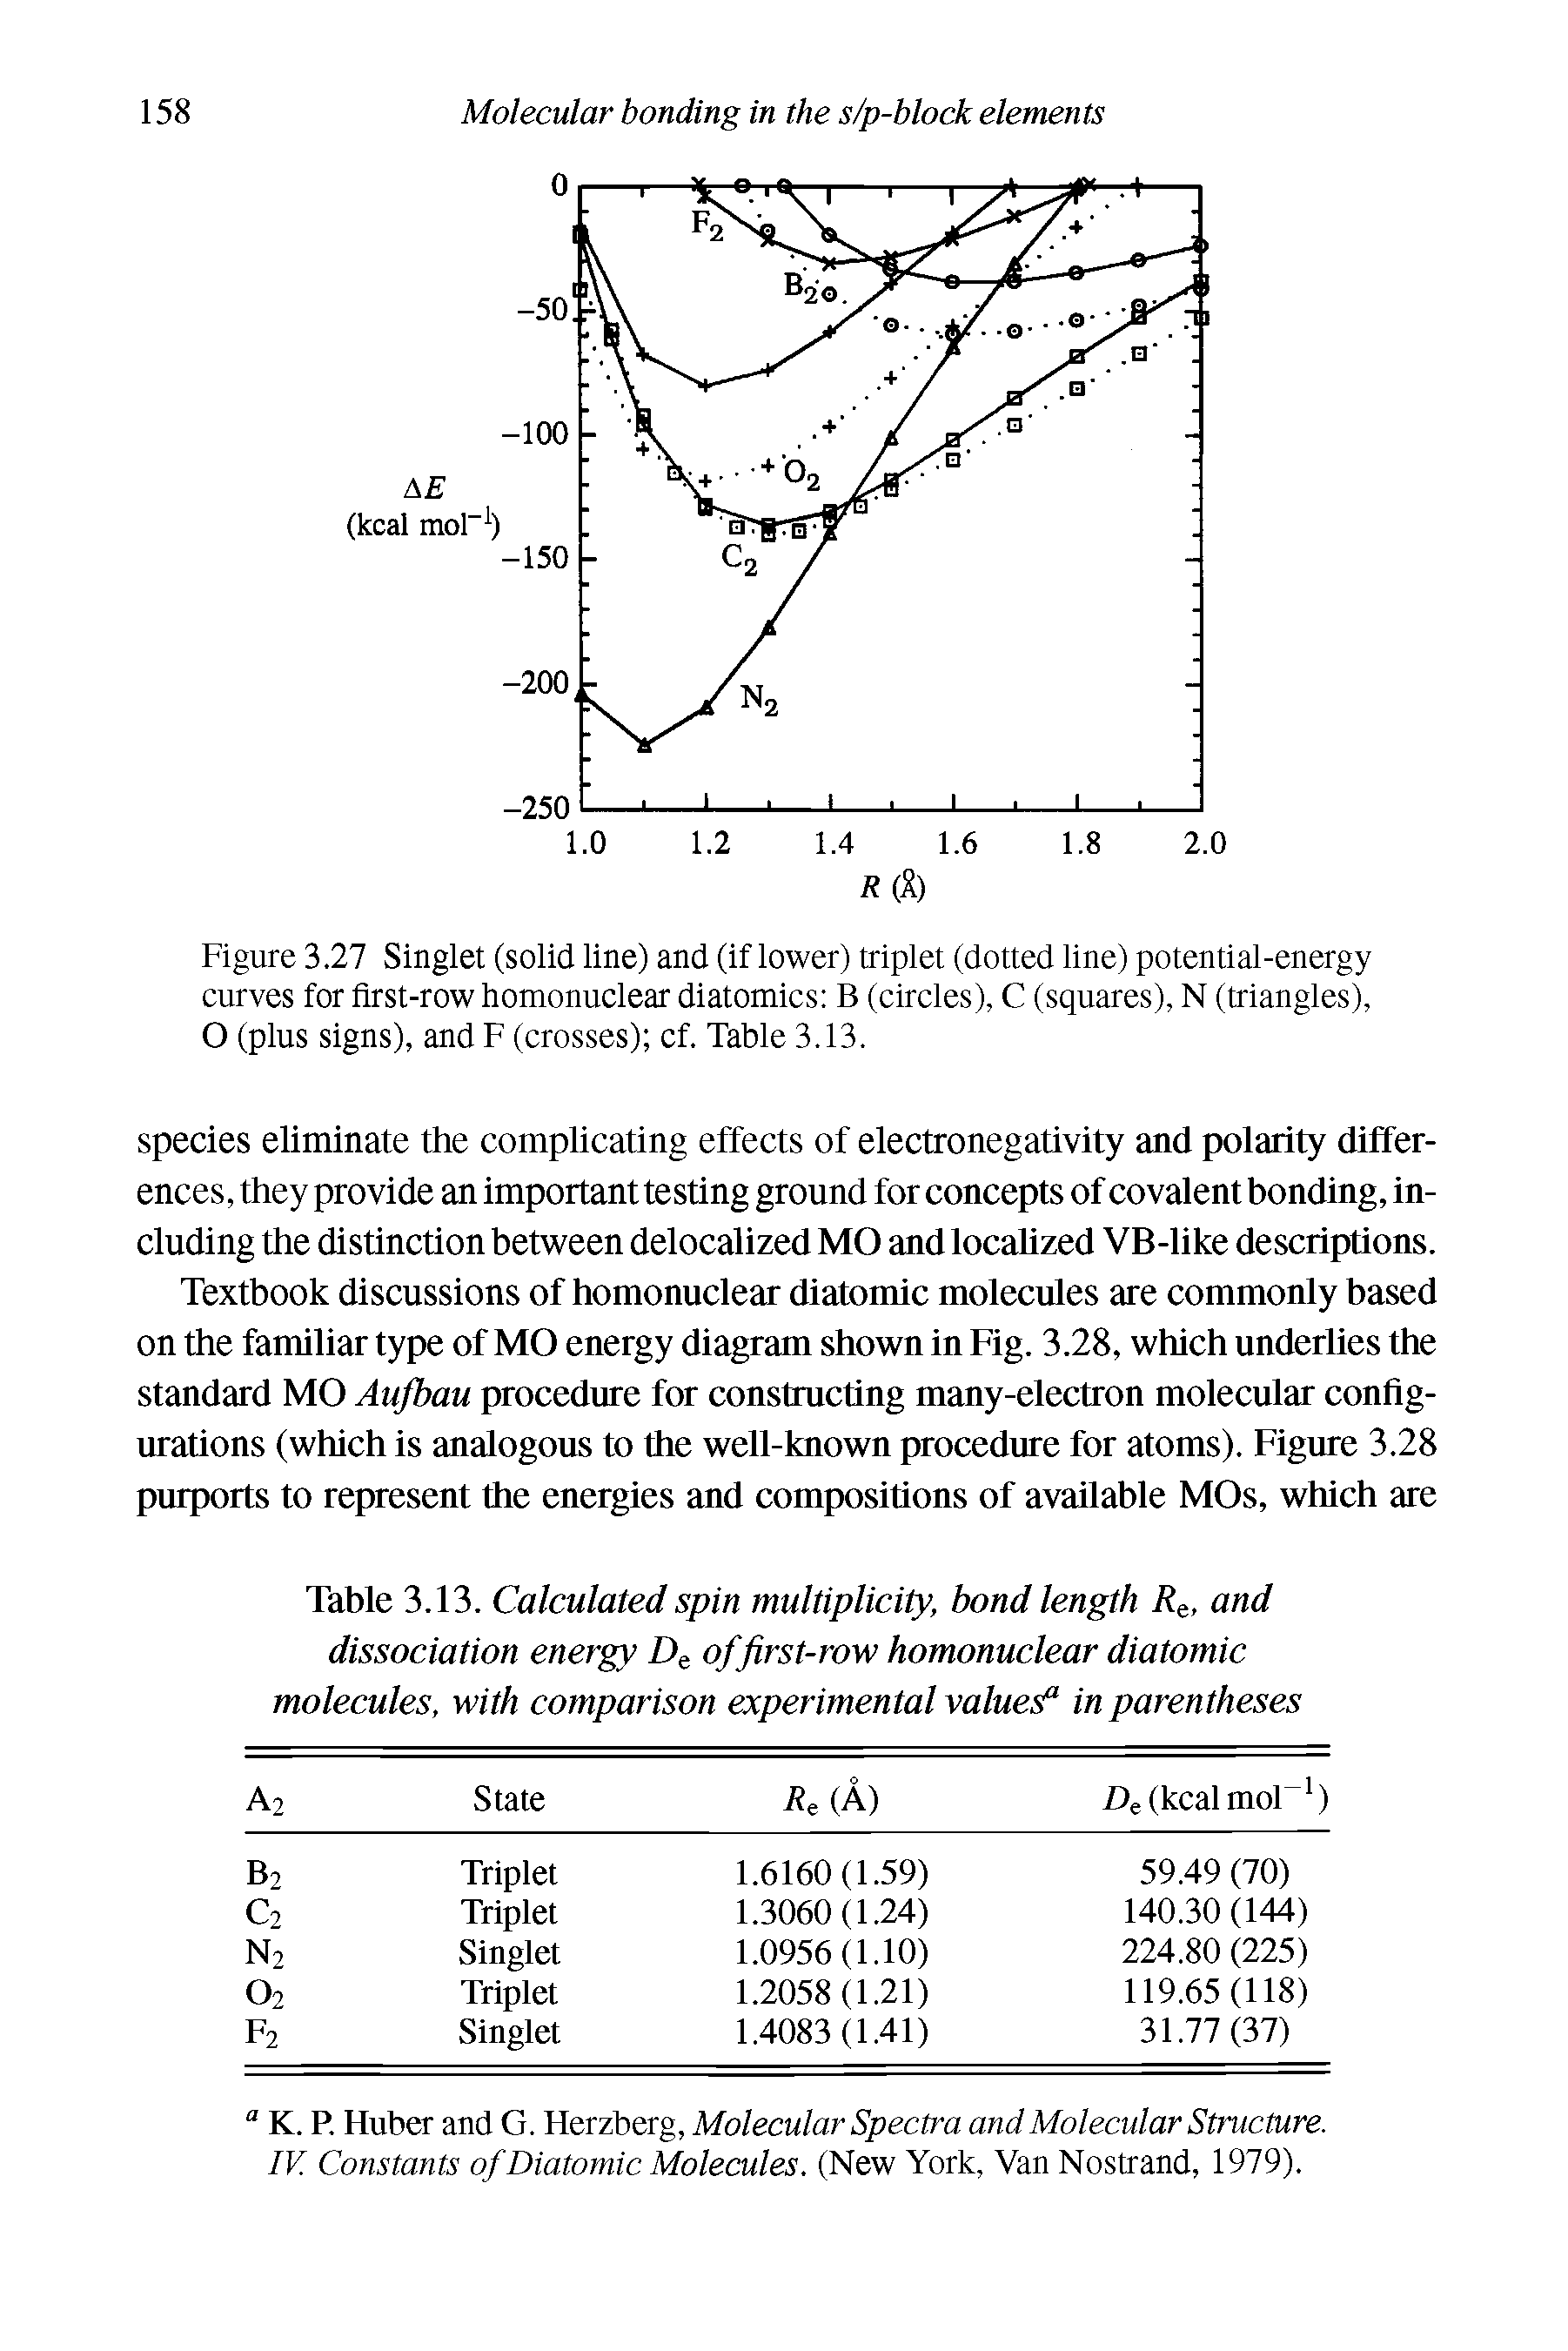 Figure 3.27 Singlet (solid line) and (if lower) triplet (dotted line) potential-energy curves for first-row homonuclear diatomics B (circles), C (squares), N (triangles),...